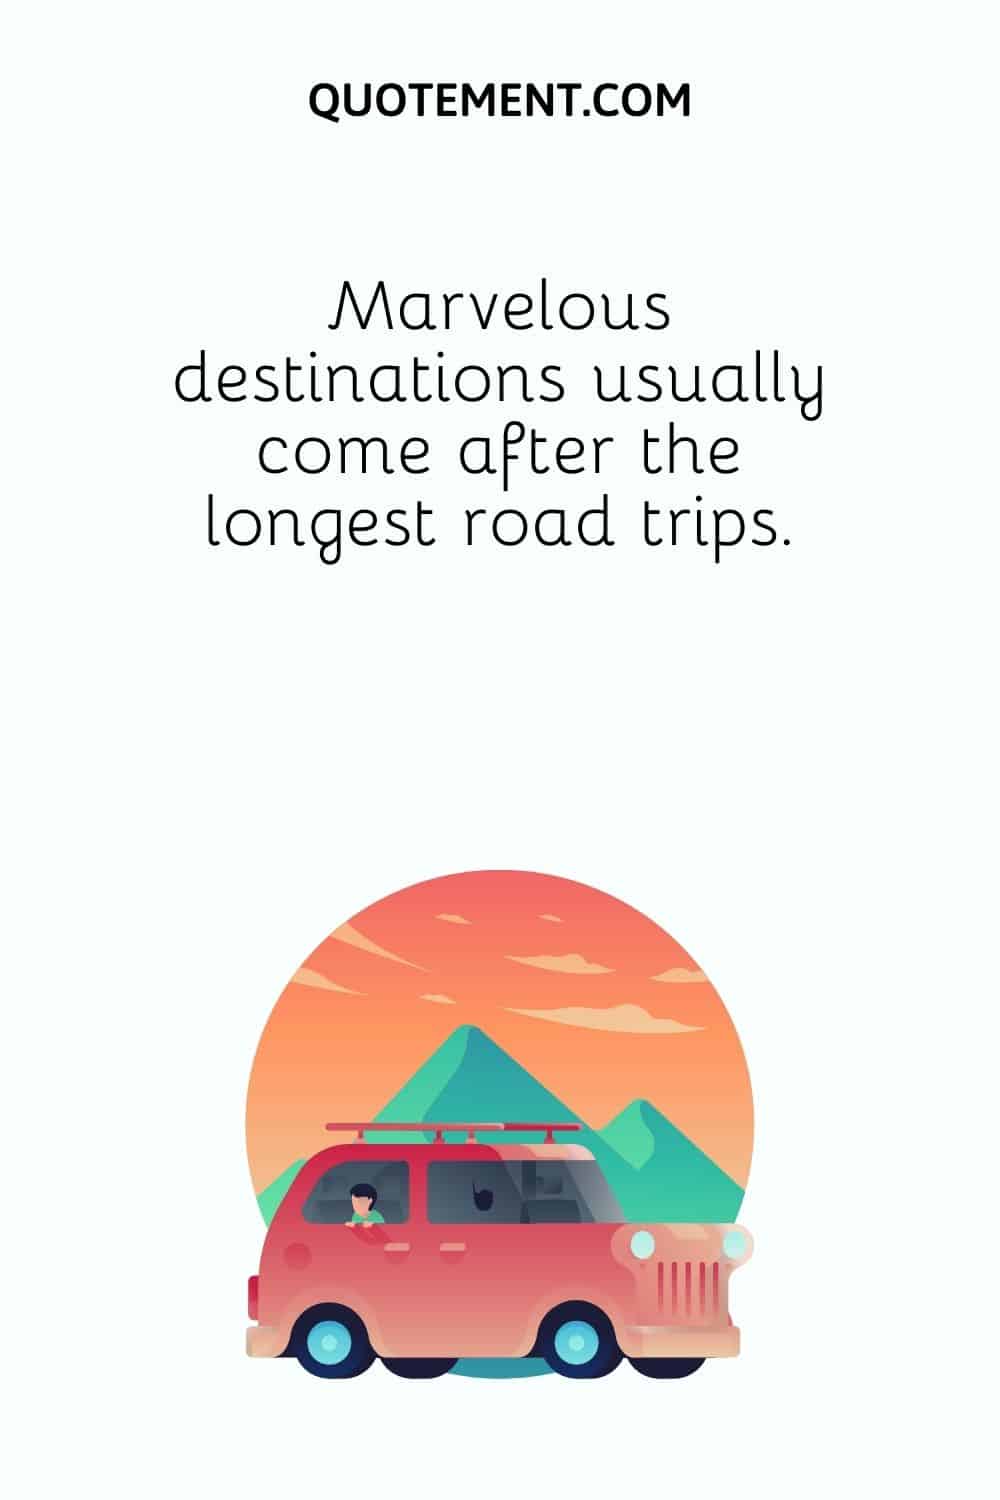 Marvelous destinations usually come after the longest road trips